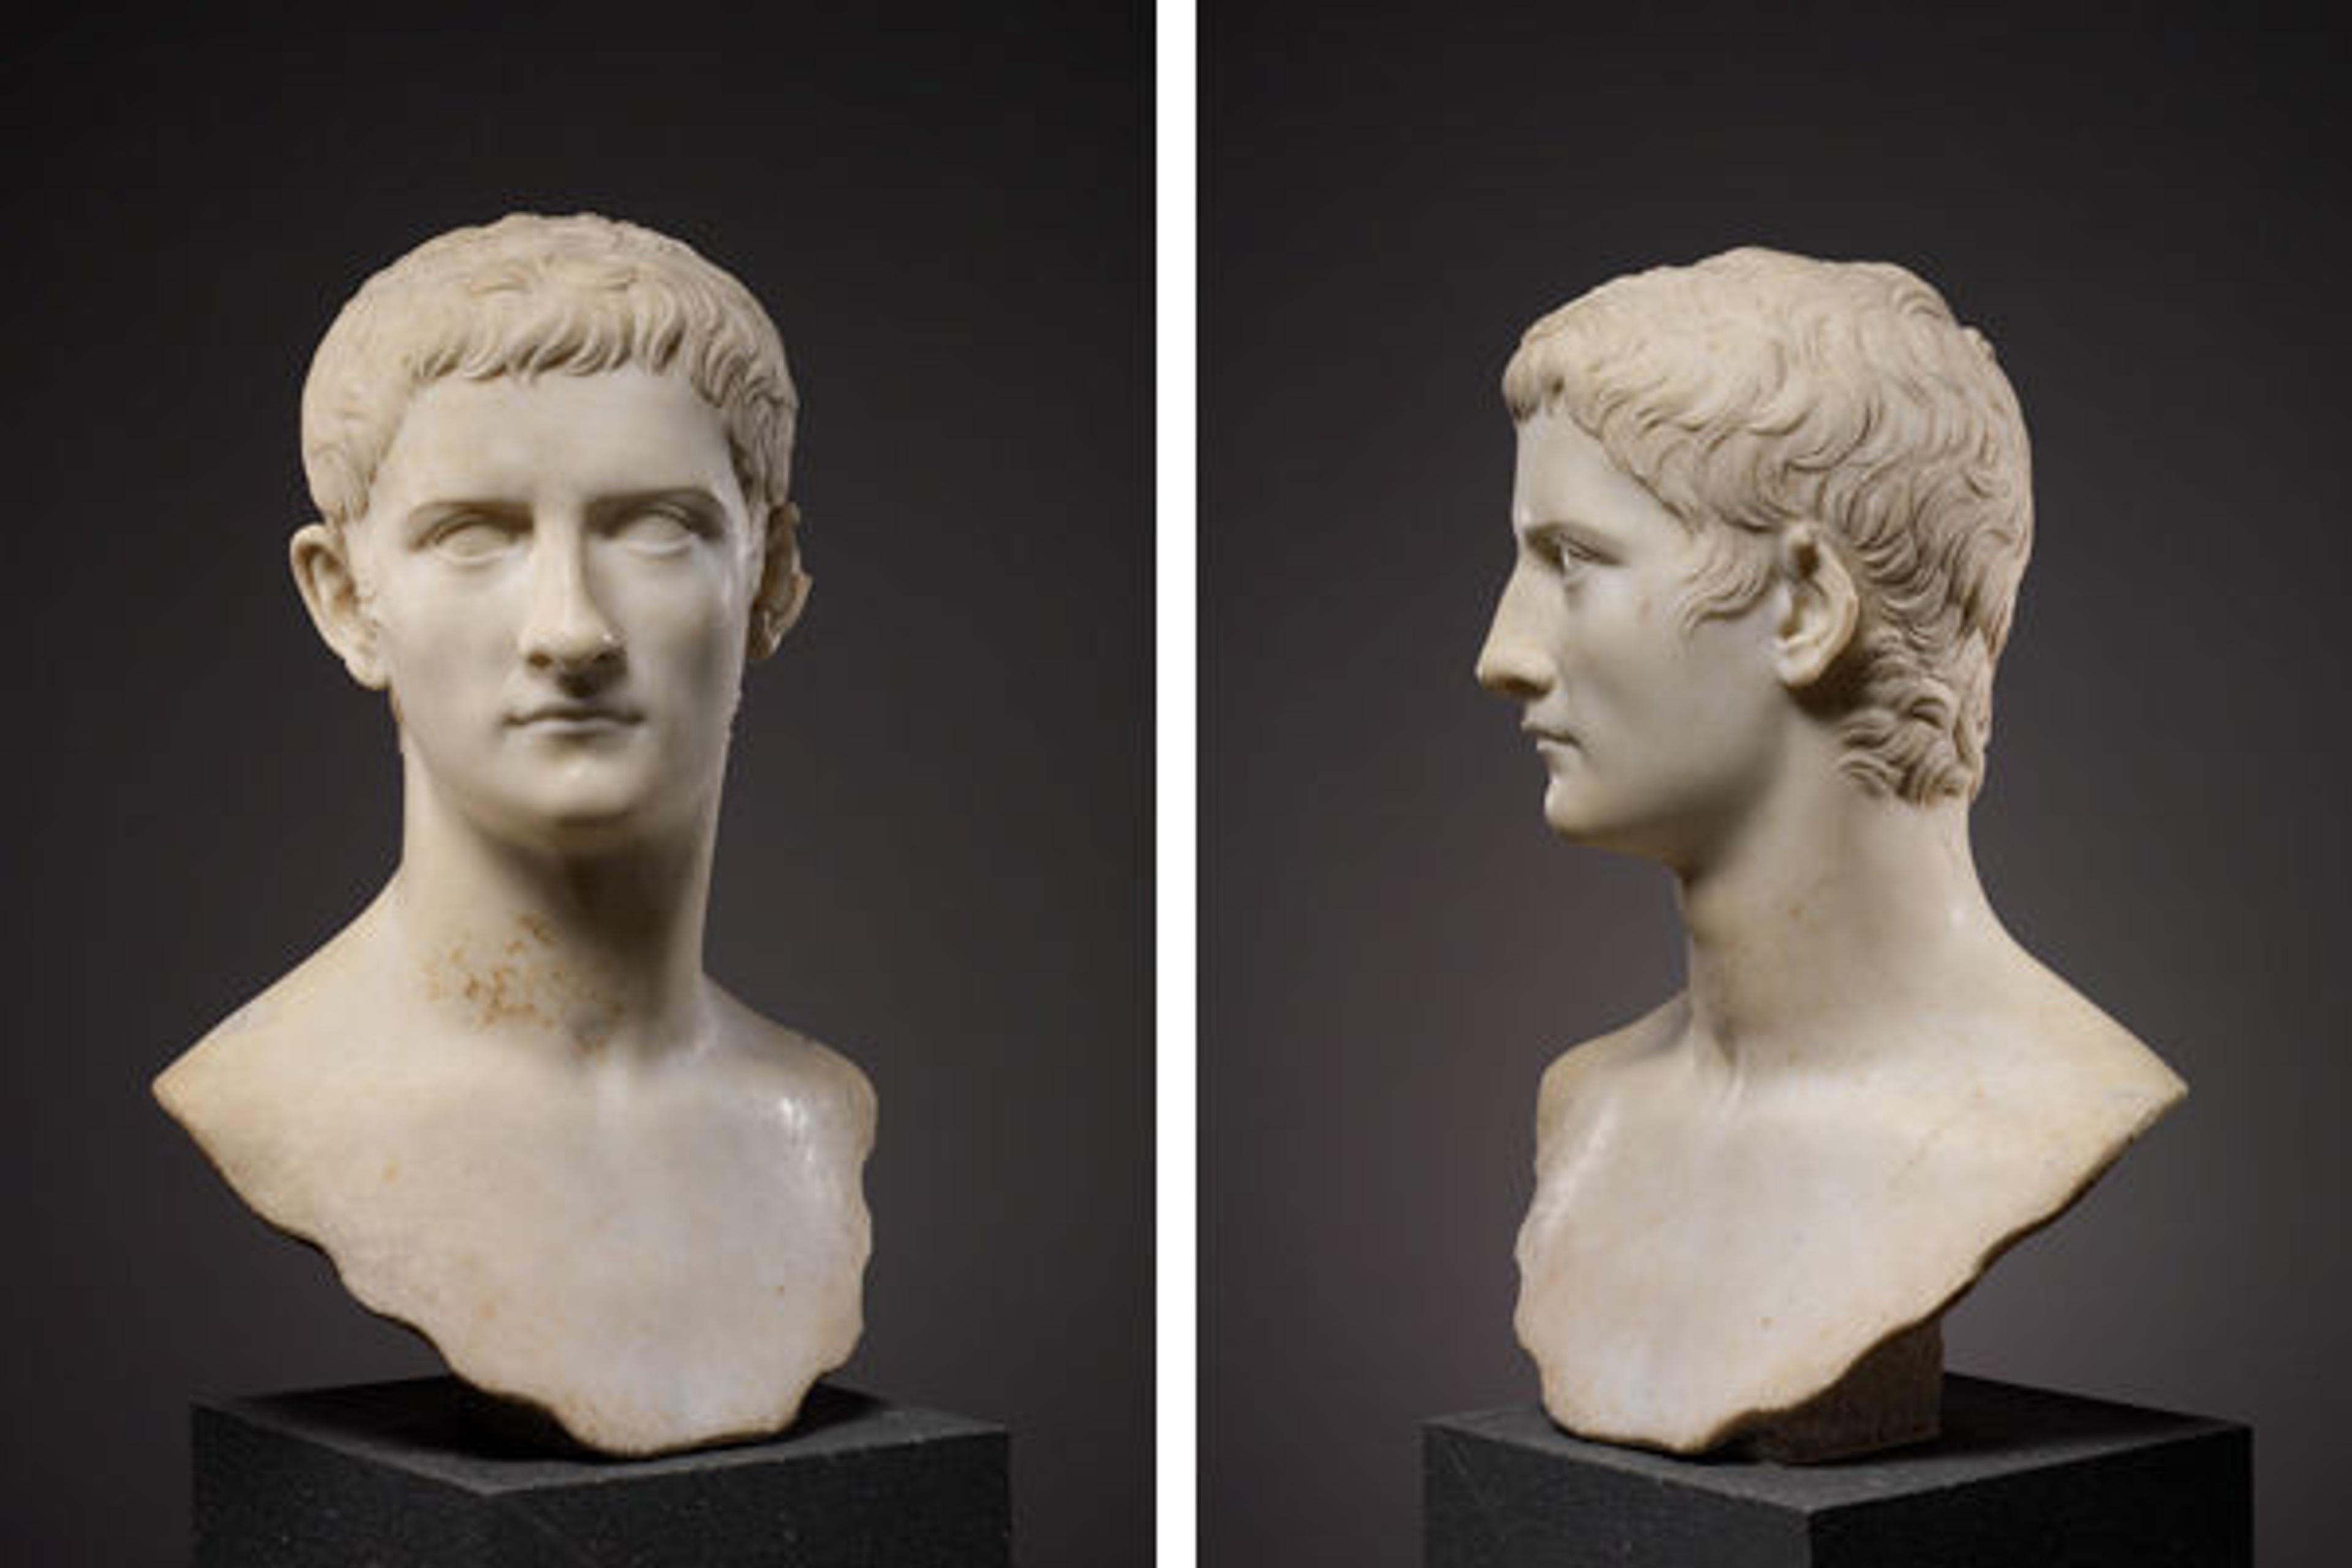 Marble portrait bust of the emperor Gaius, known as Caligula, A.D. 37–41. Roman, early Imperial, Julio-Claudian. Marble: H. 20 in. (50.8 cm) length 7 1/16 in. (18 cm). The Metropolitan Museum of Art, New York, Rogers Fund, 1914 (14.37)